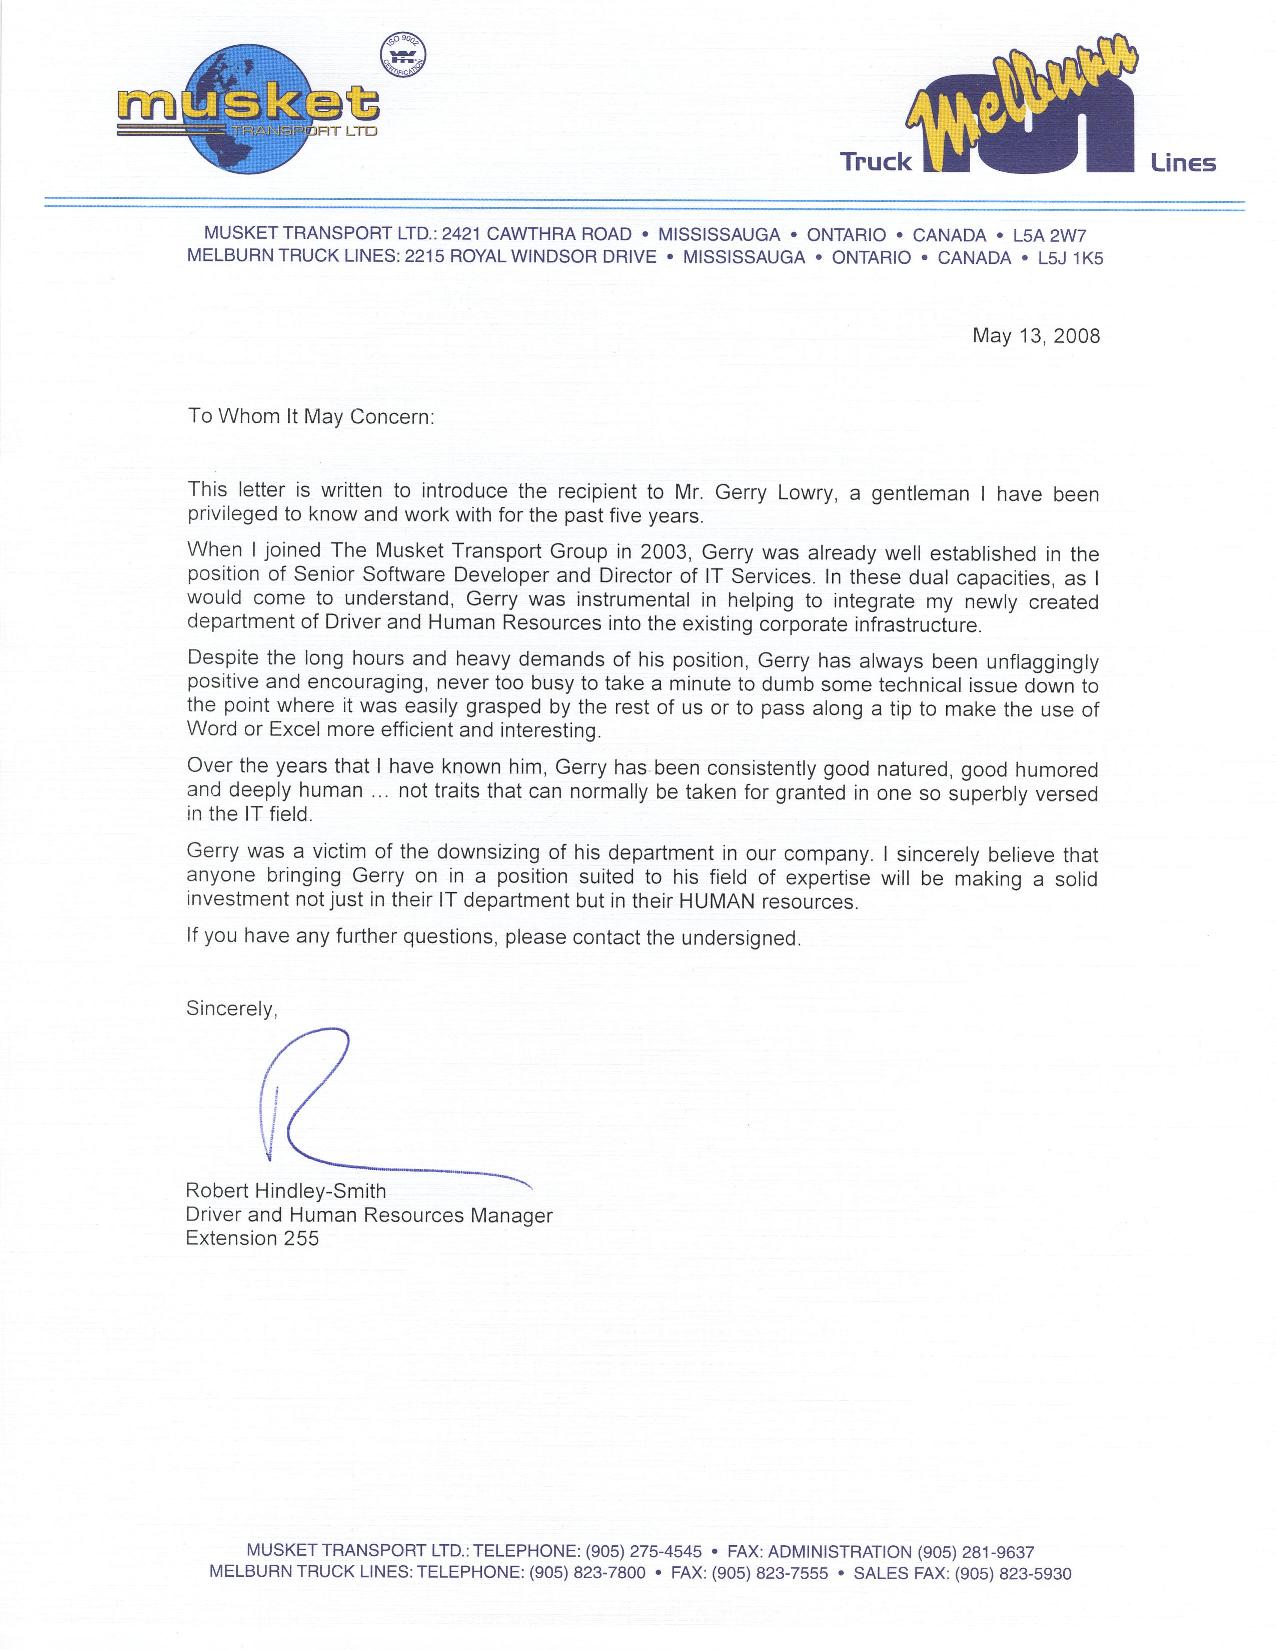 Testimonial Letter about Gerry Lowry by Rob Hindley-Smith, Human Resources Manager